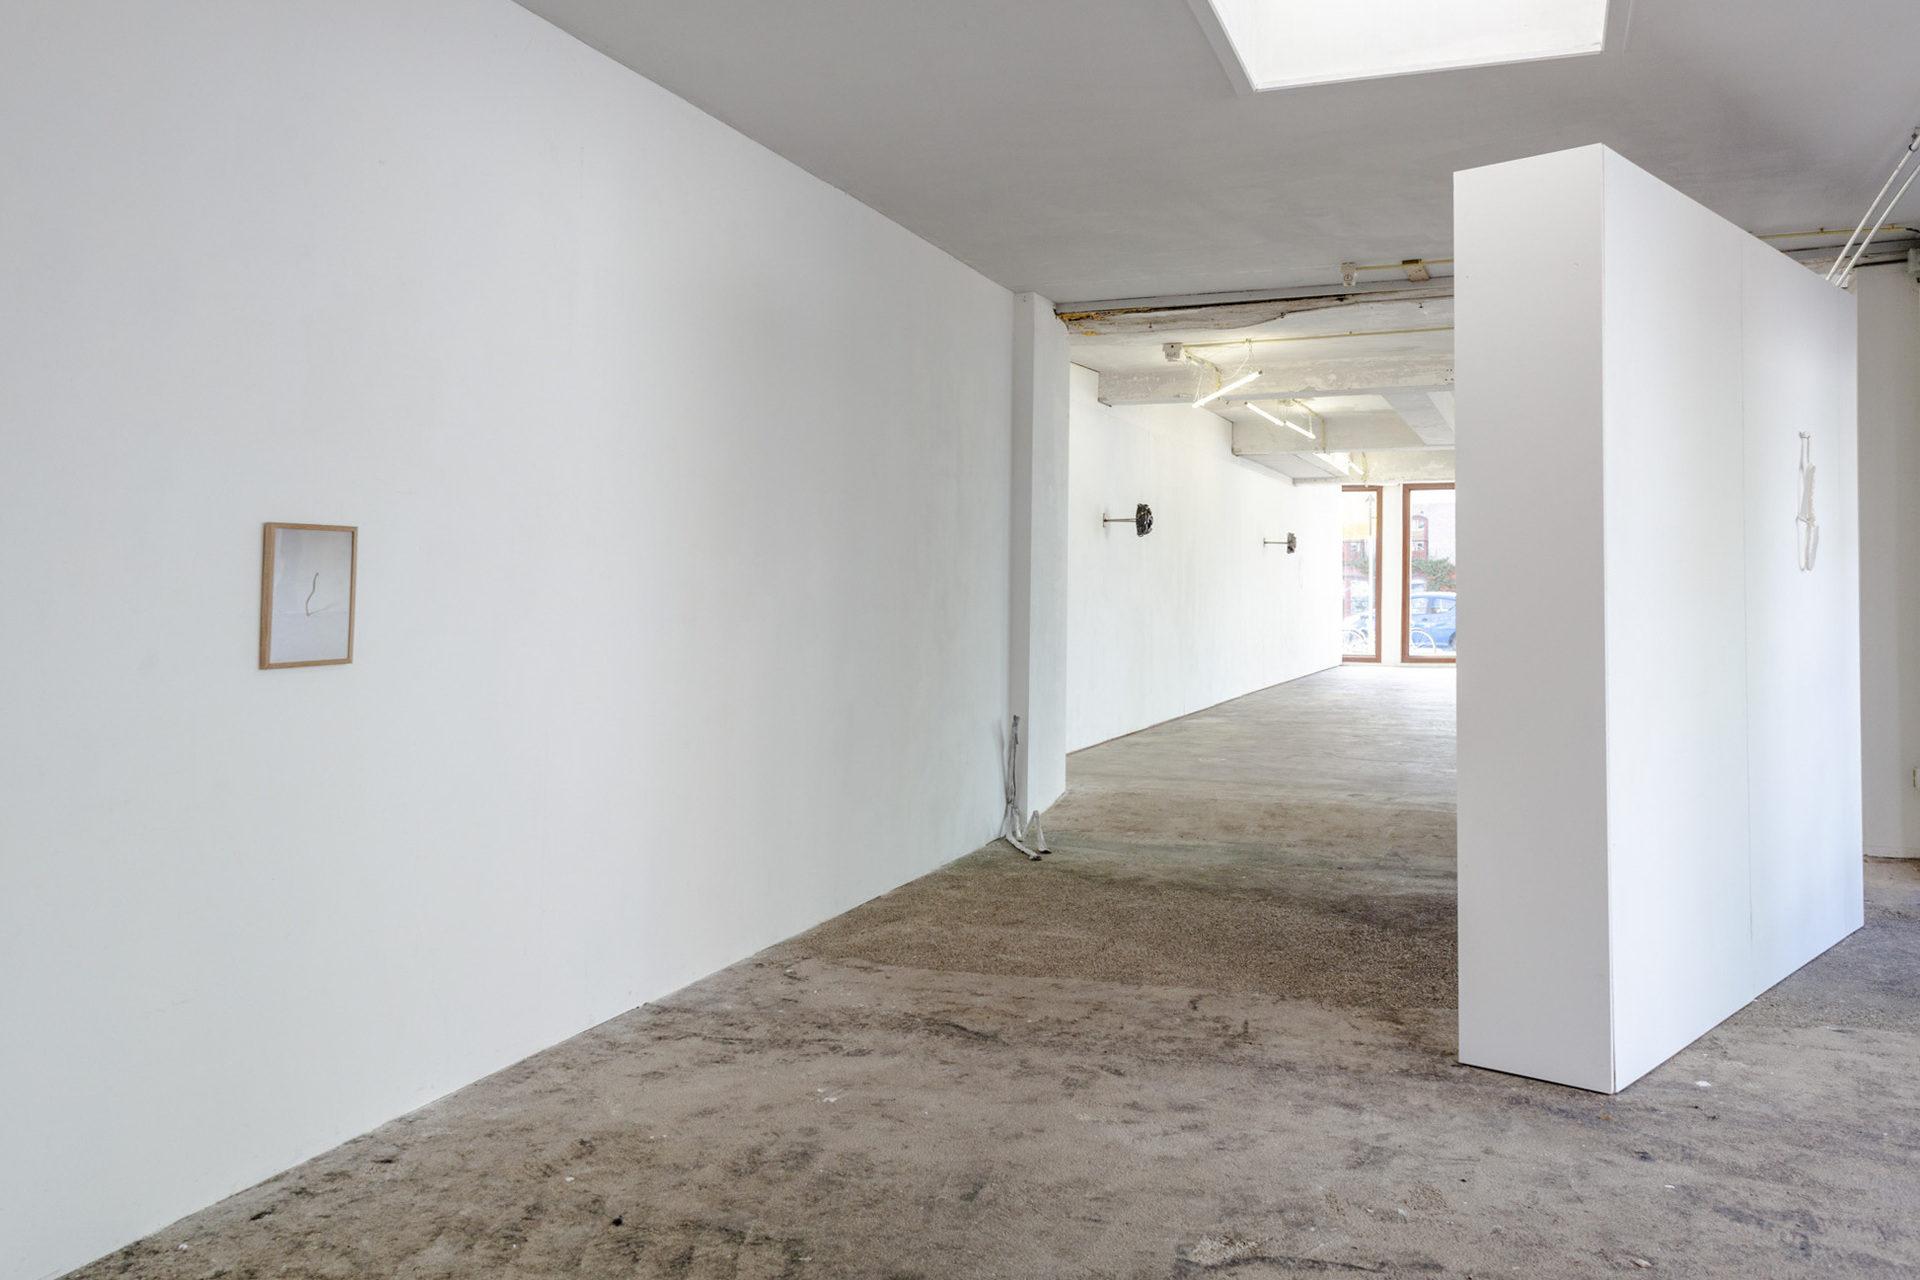 Exhibition View 3, Palpable Surfaces,2020, at Trixie The Hague